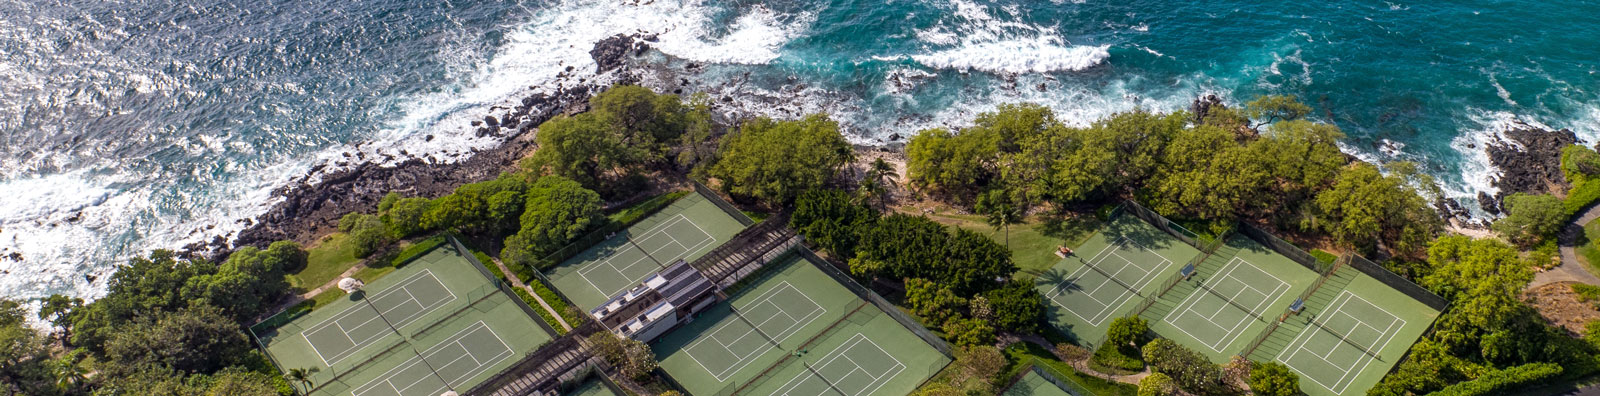 Game, Set, Match! Best Tennis Courts to Visit By Boat